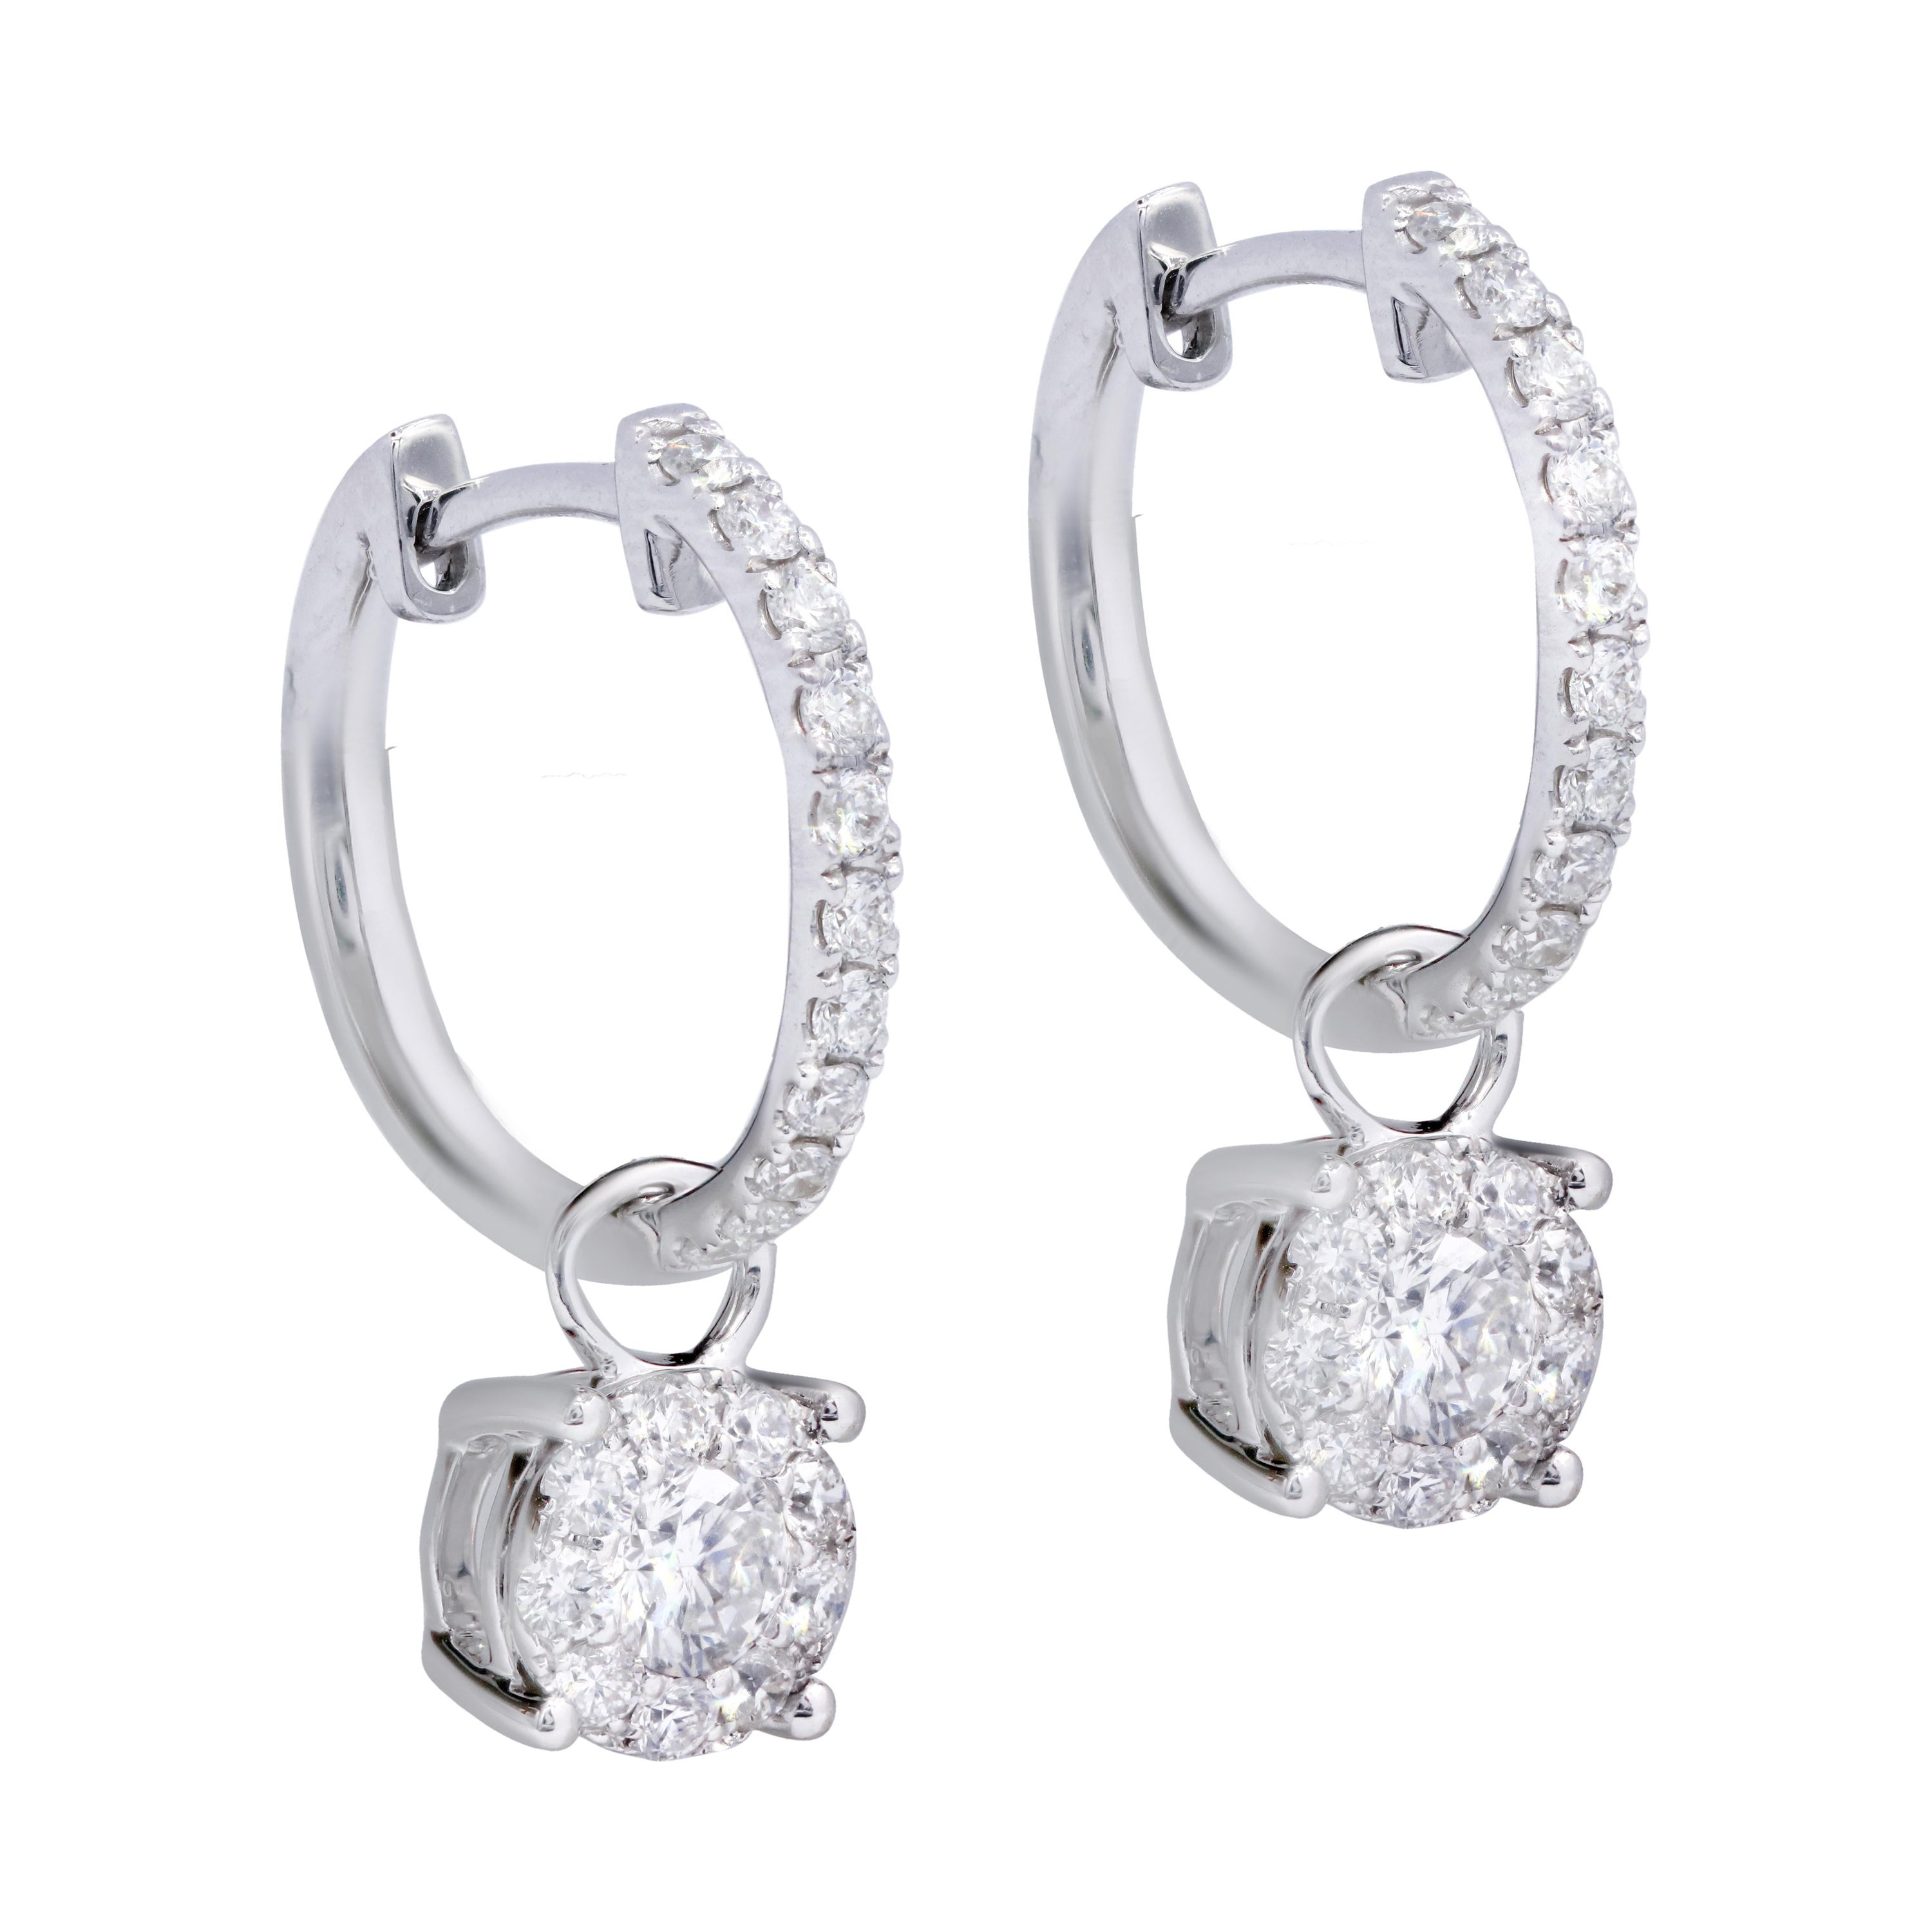 Diana M. 14kt white gold drop earrings featuring 1.00 cts tw of round diamonds 